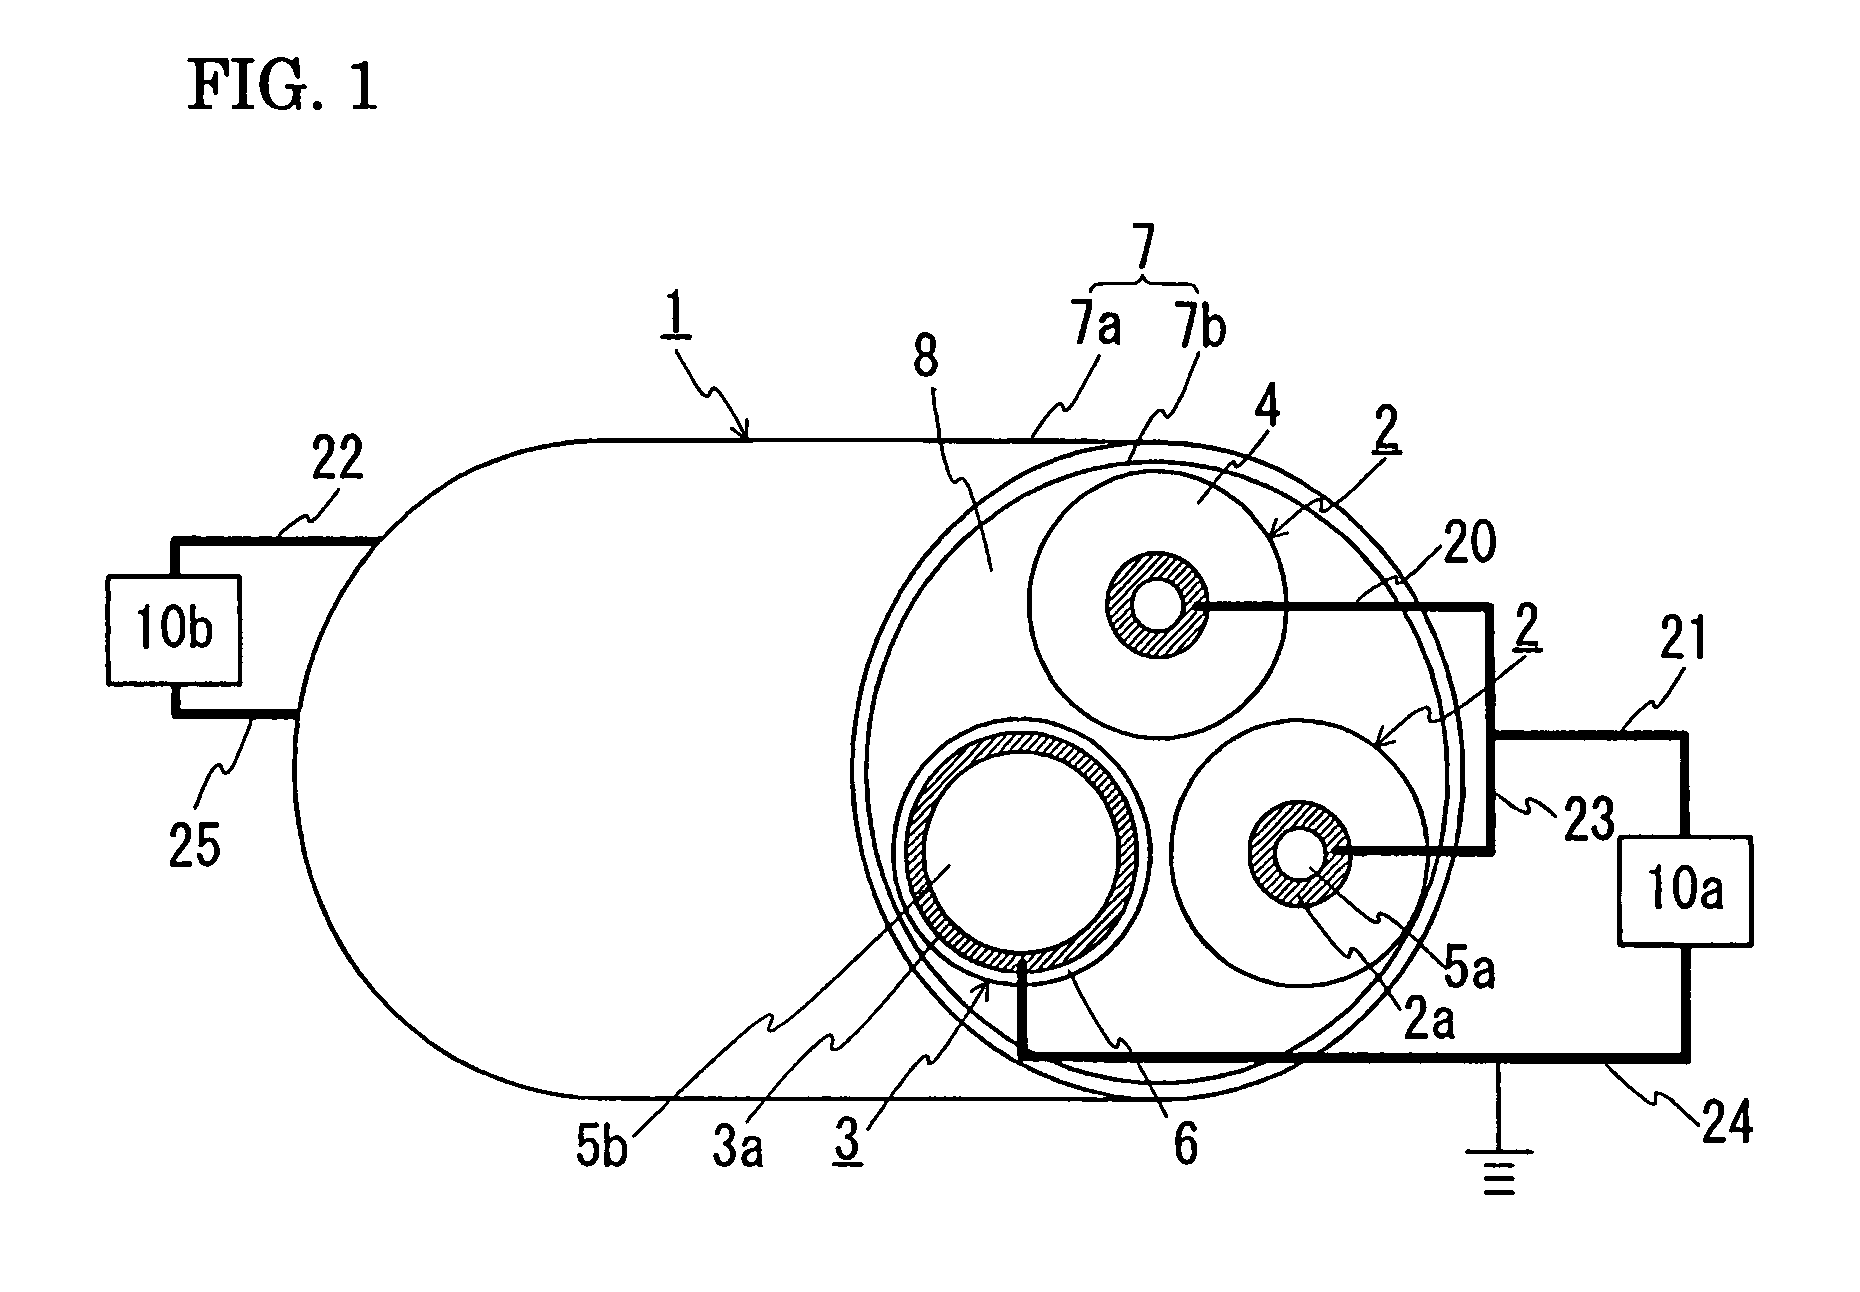 Superconducting cable and DC transmission system incorporating the superconducting cable